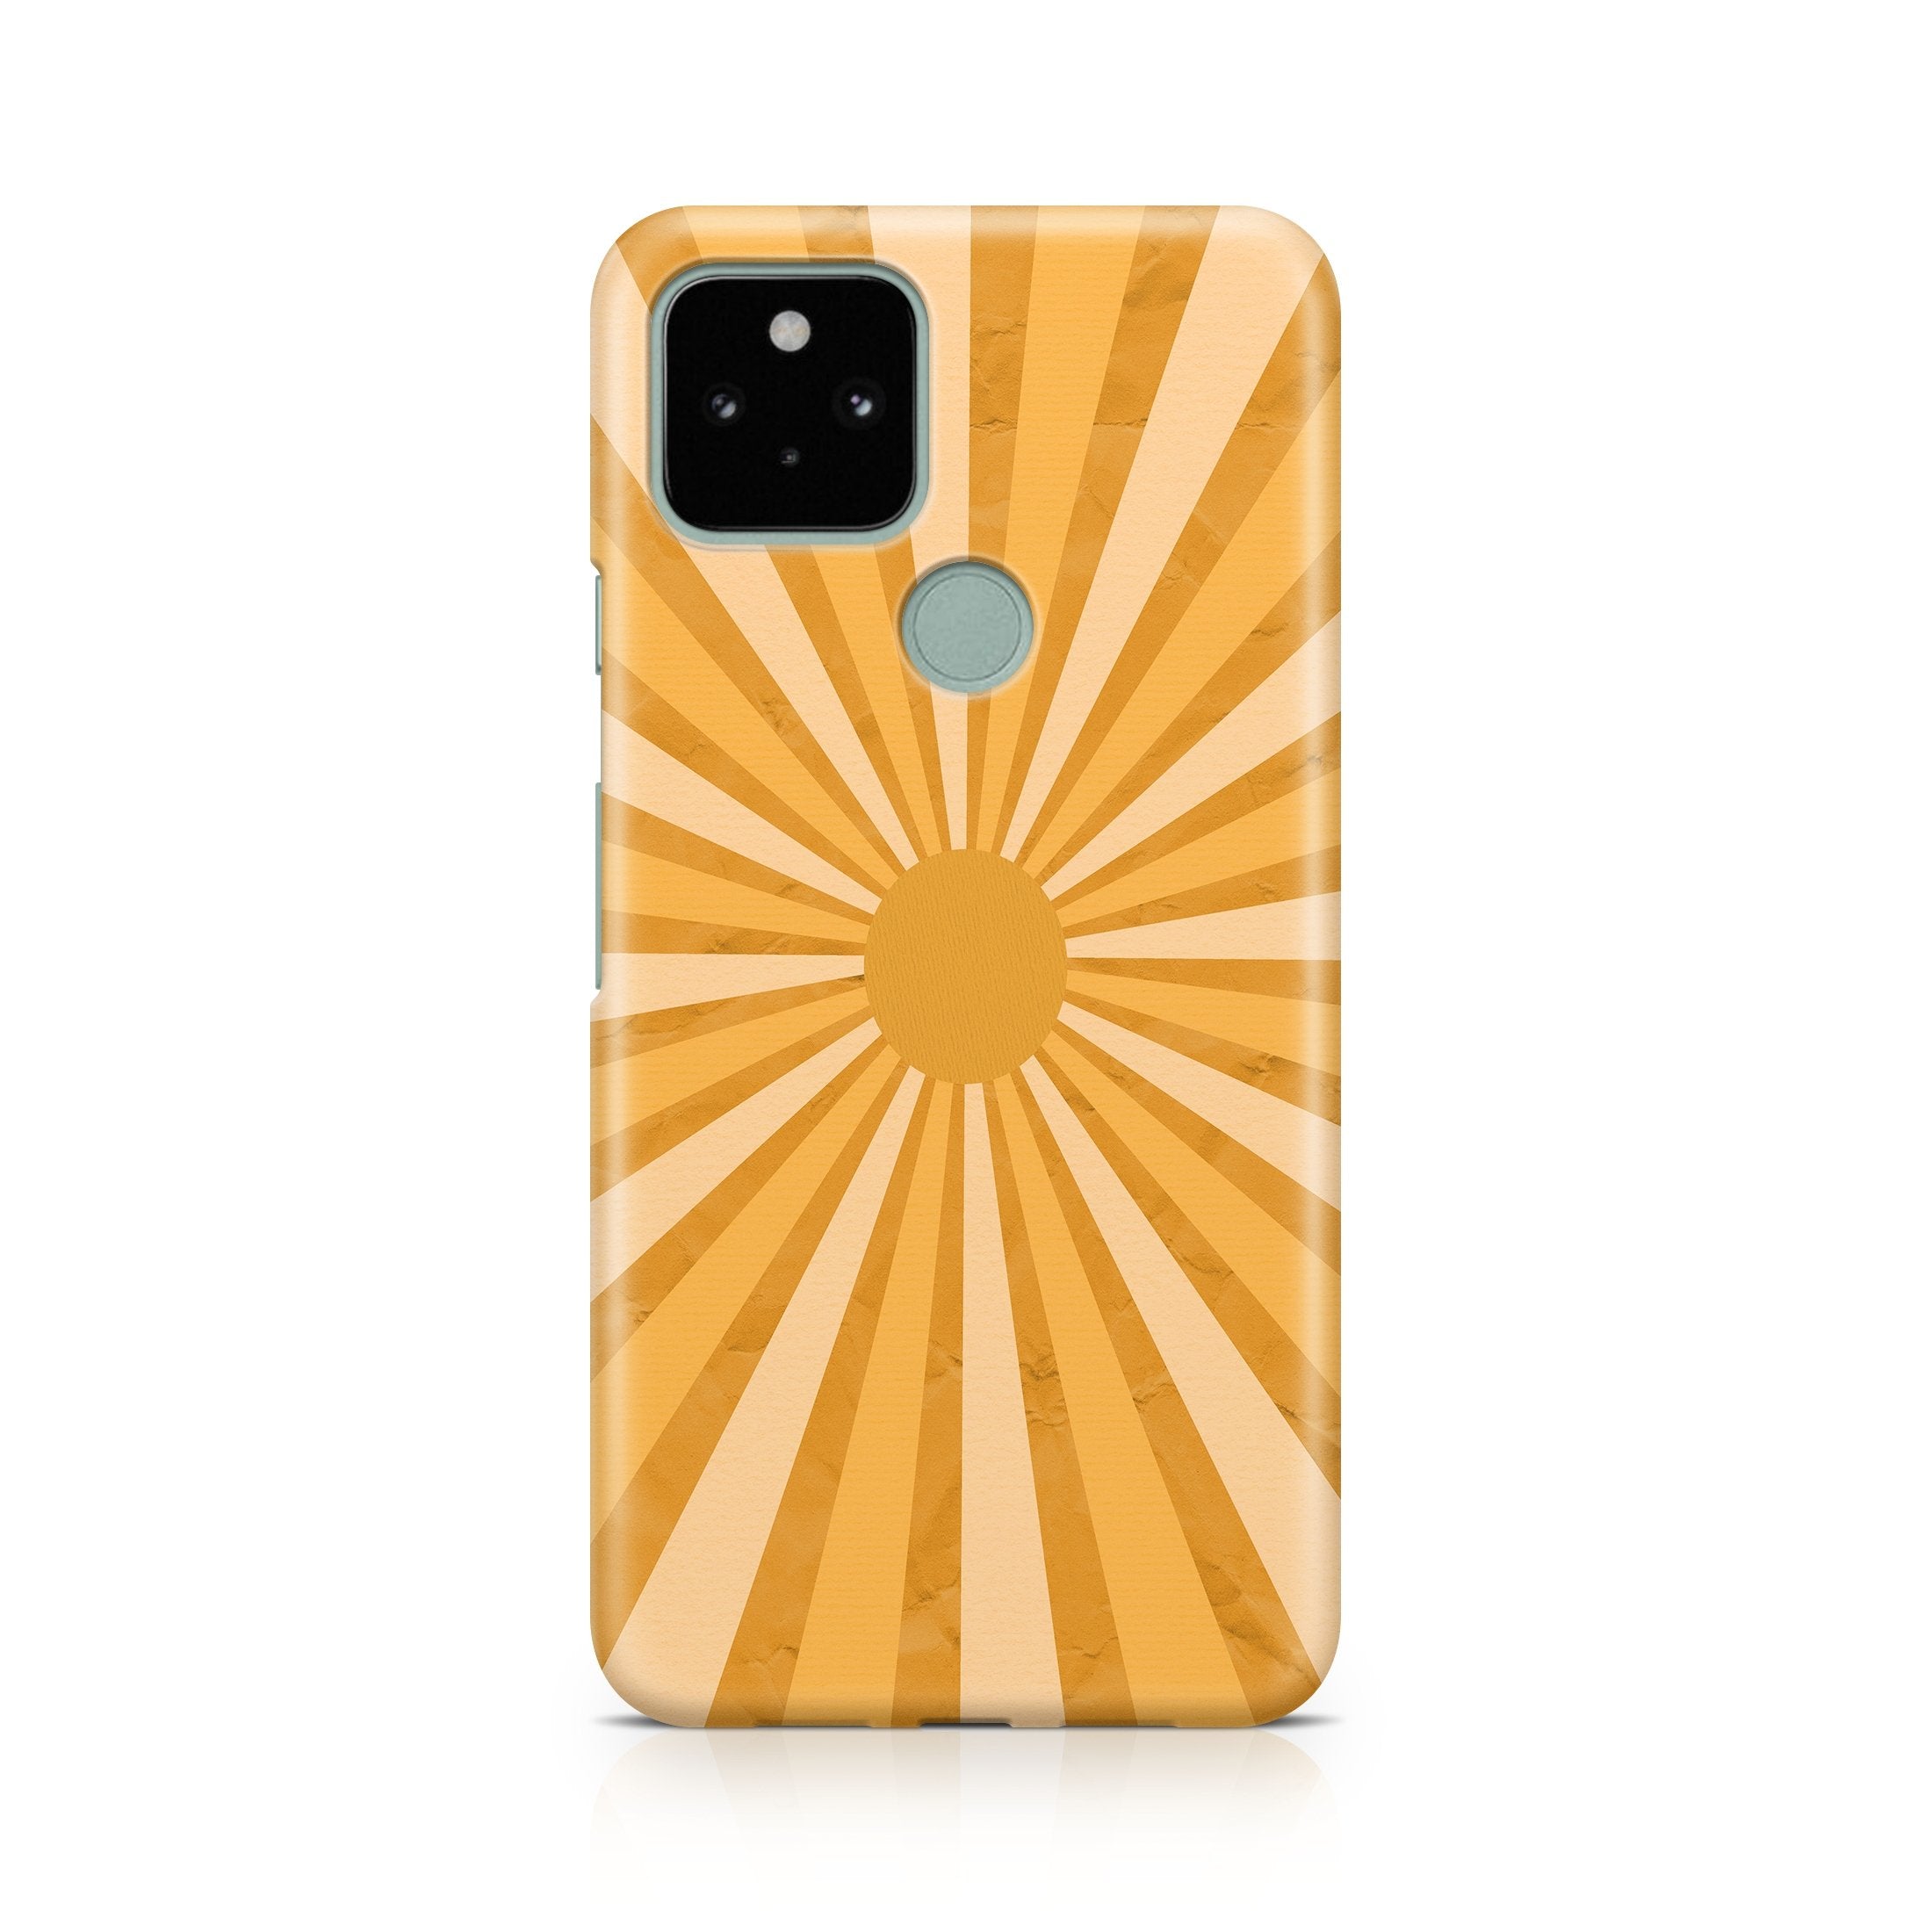 Retro Sunlight - Google phone case designs by CaseSwagger